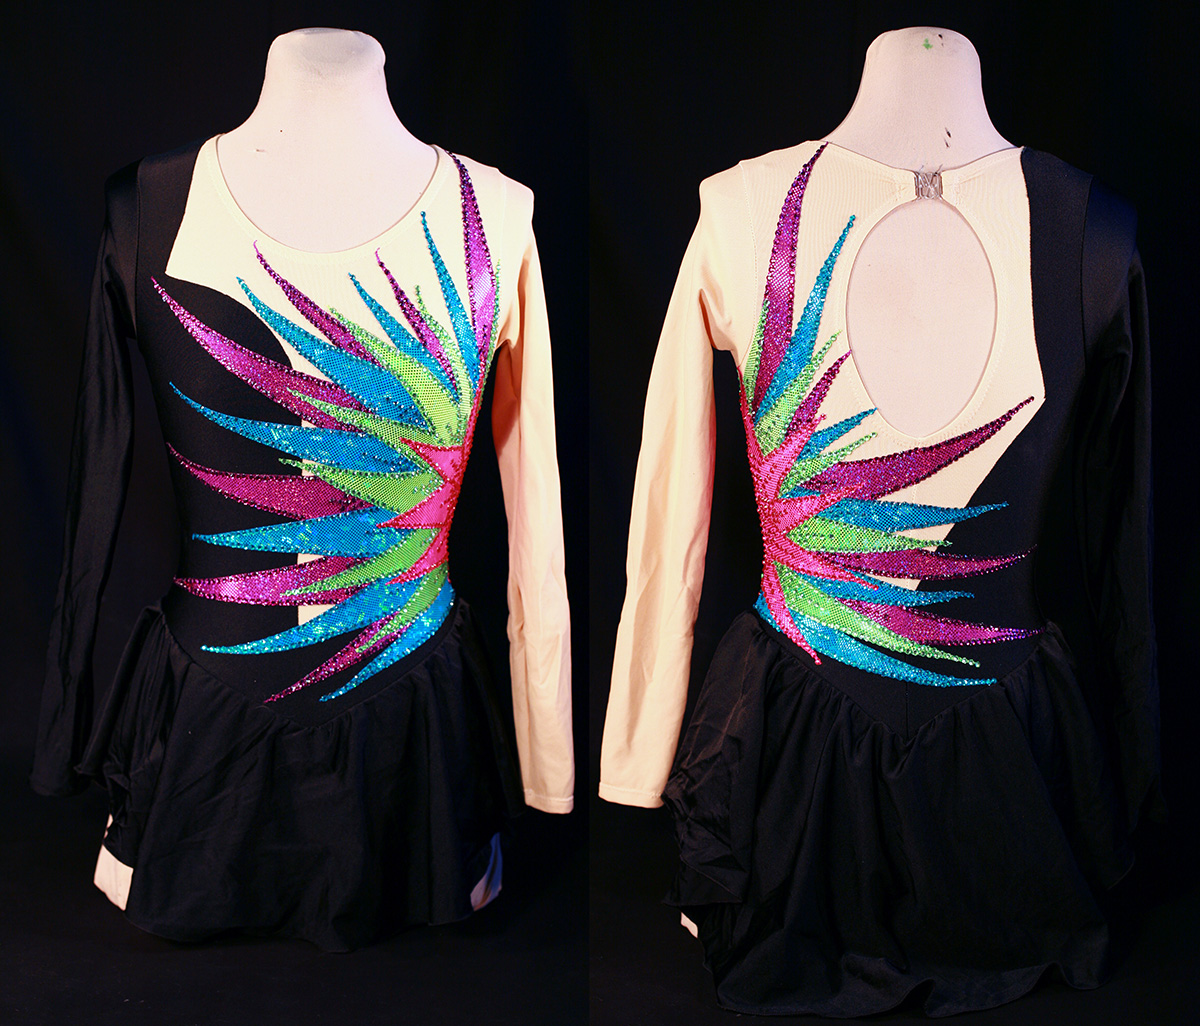 Front and back views of a black and beige skating dress with a pink, green, and purple starburst design on one side.